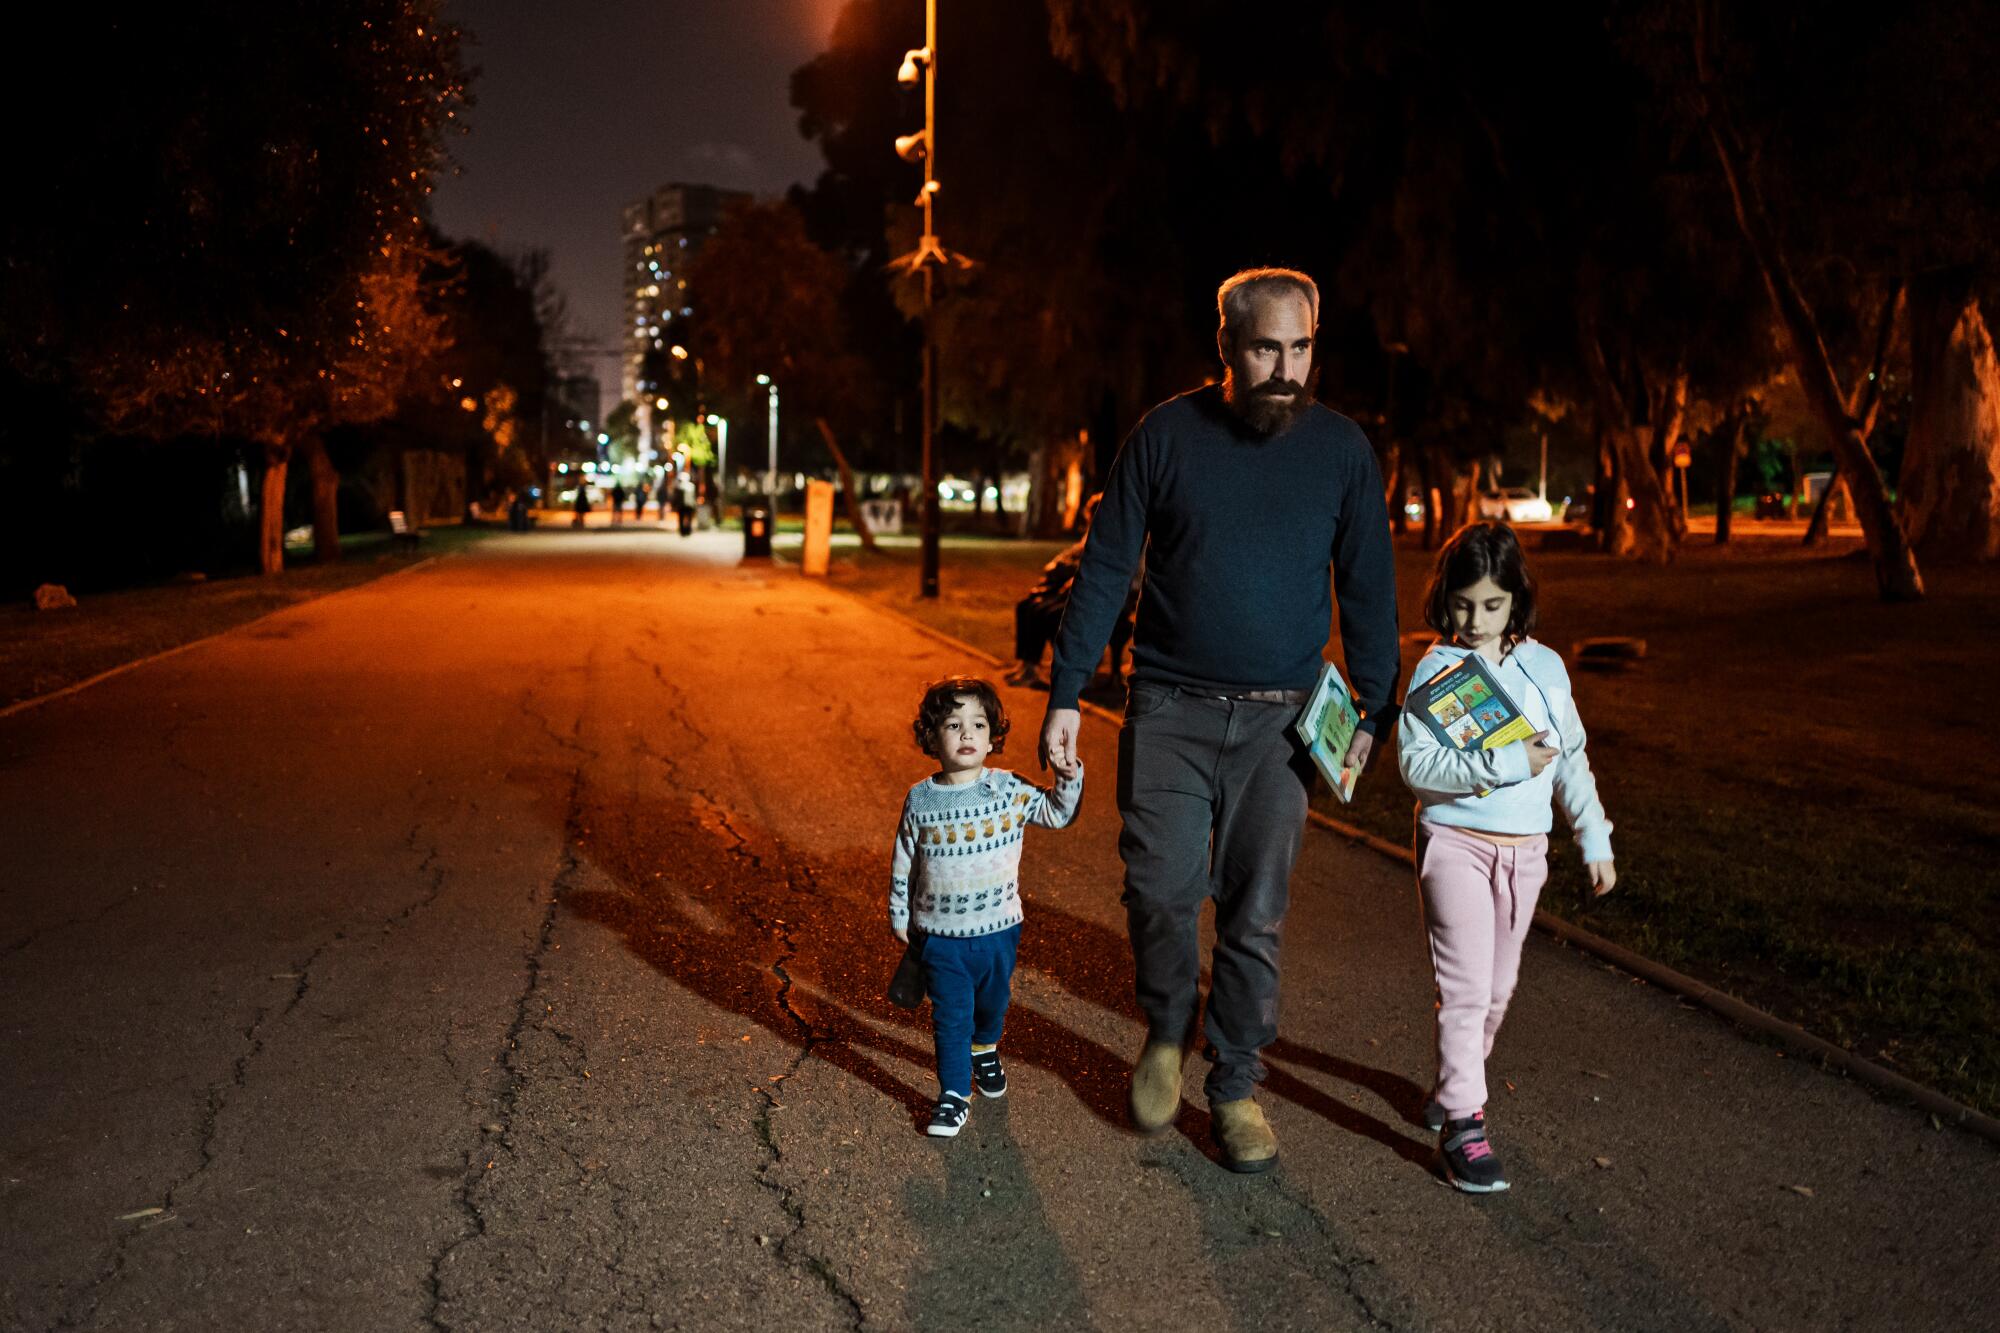 A bearded man holds a young boy's hand while walking next to a young girl, holding a book, on a lit path at night